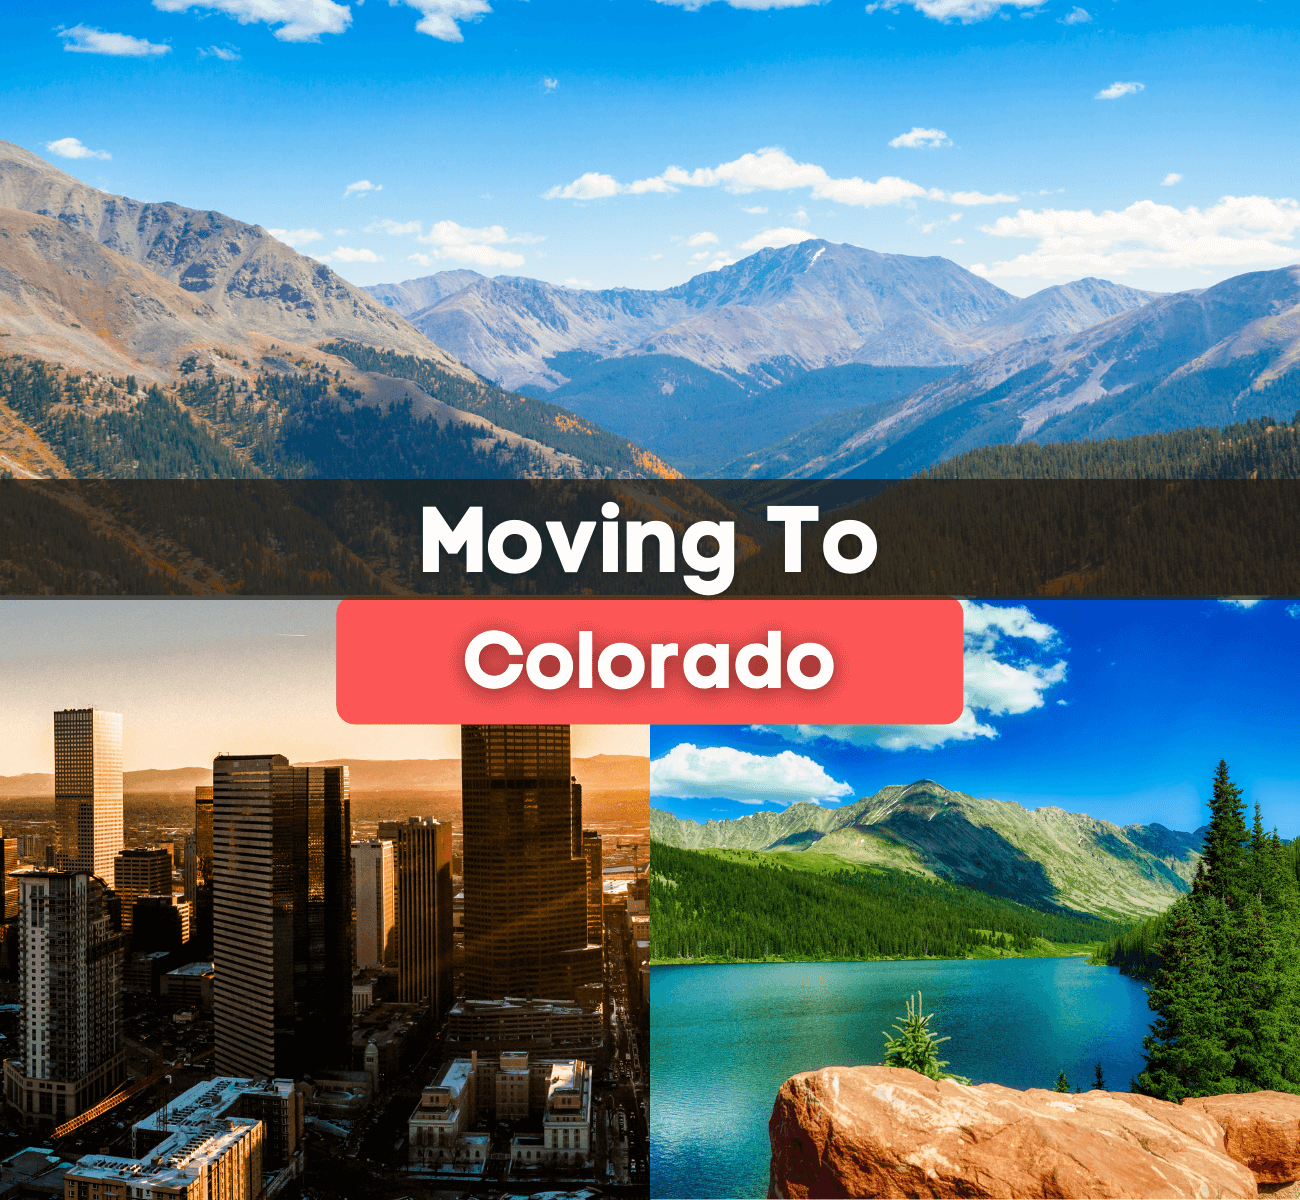 Moving to Colorado - What is it like living in the state of Colorado?